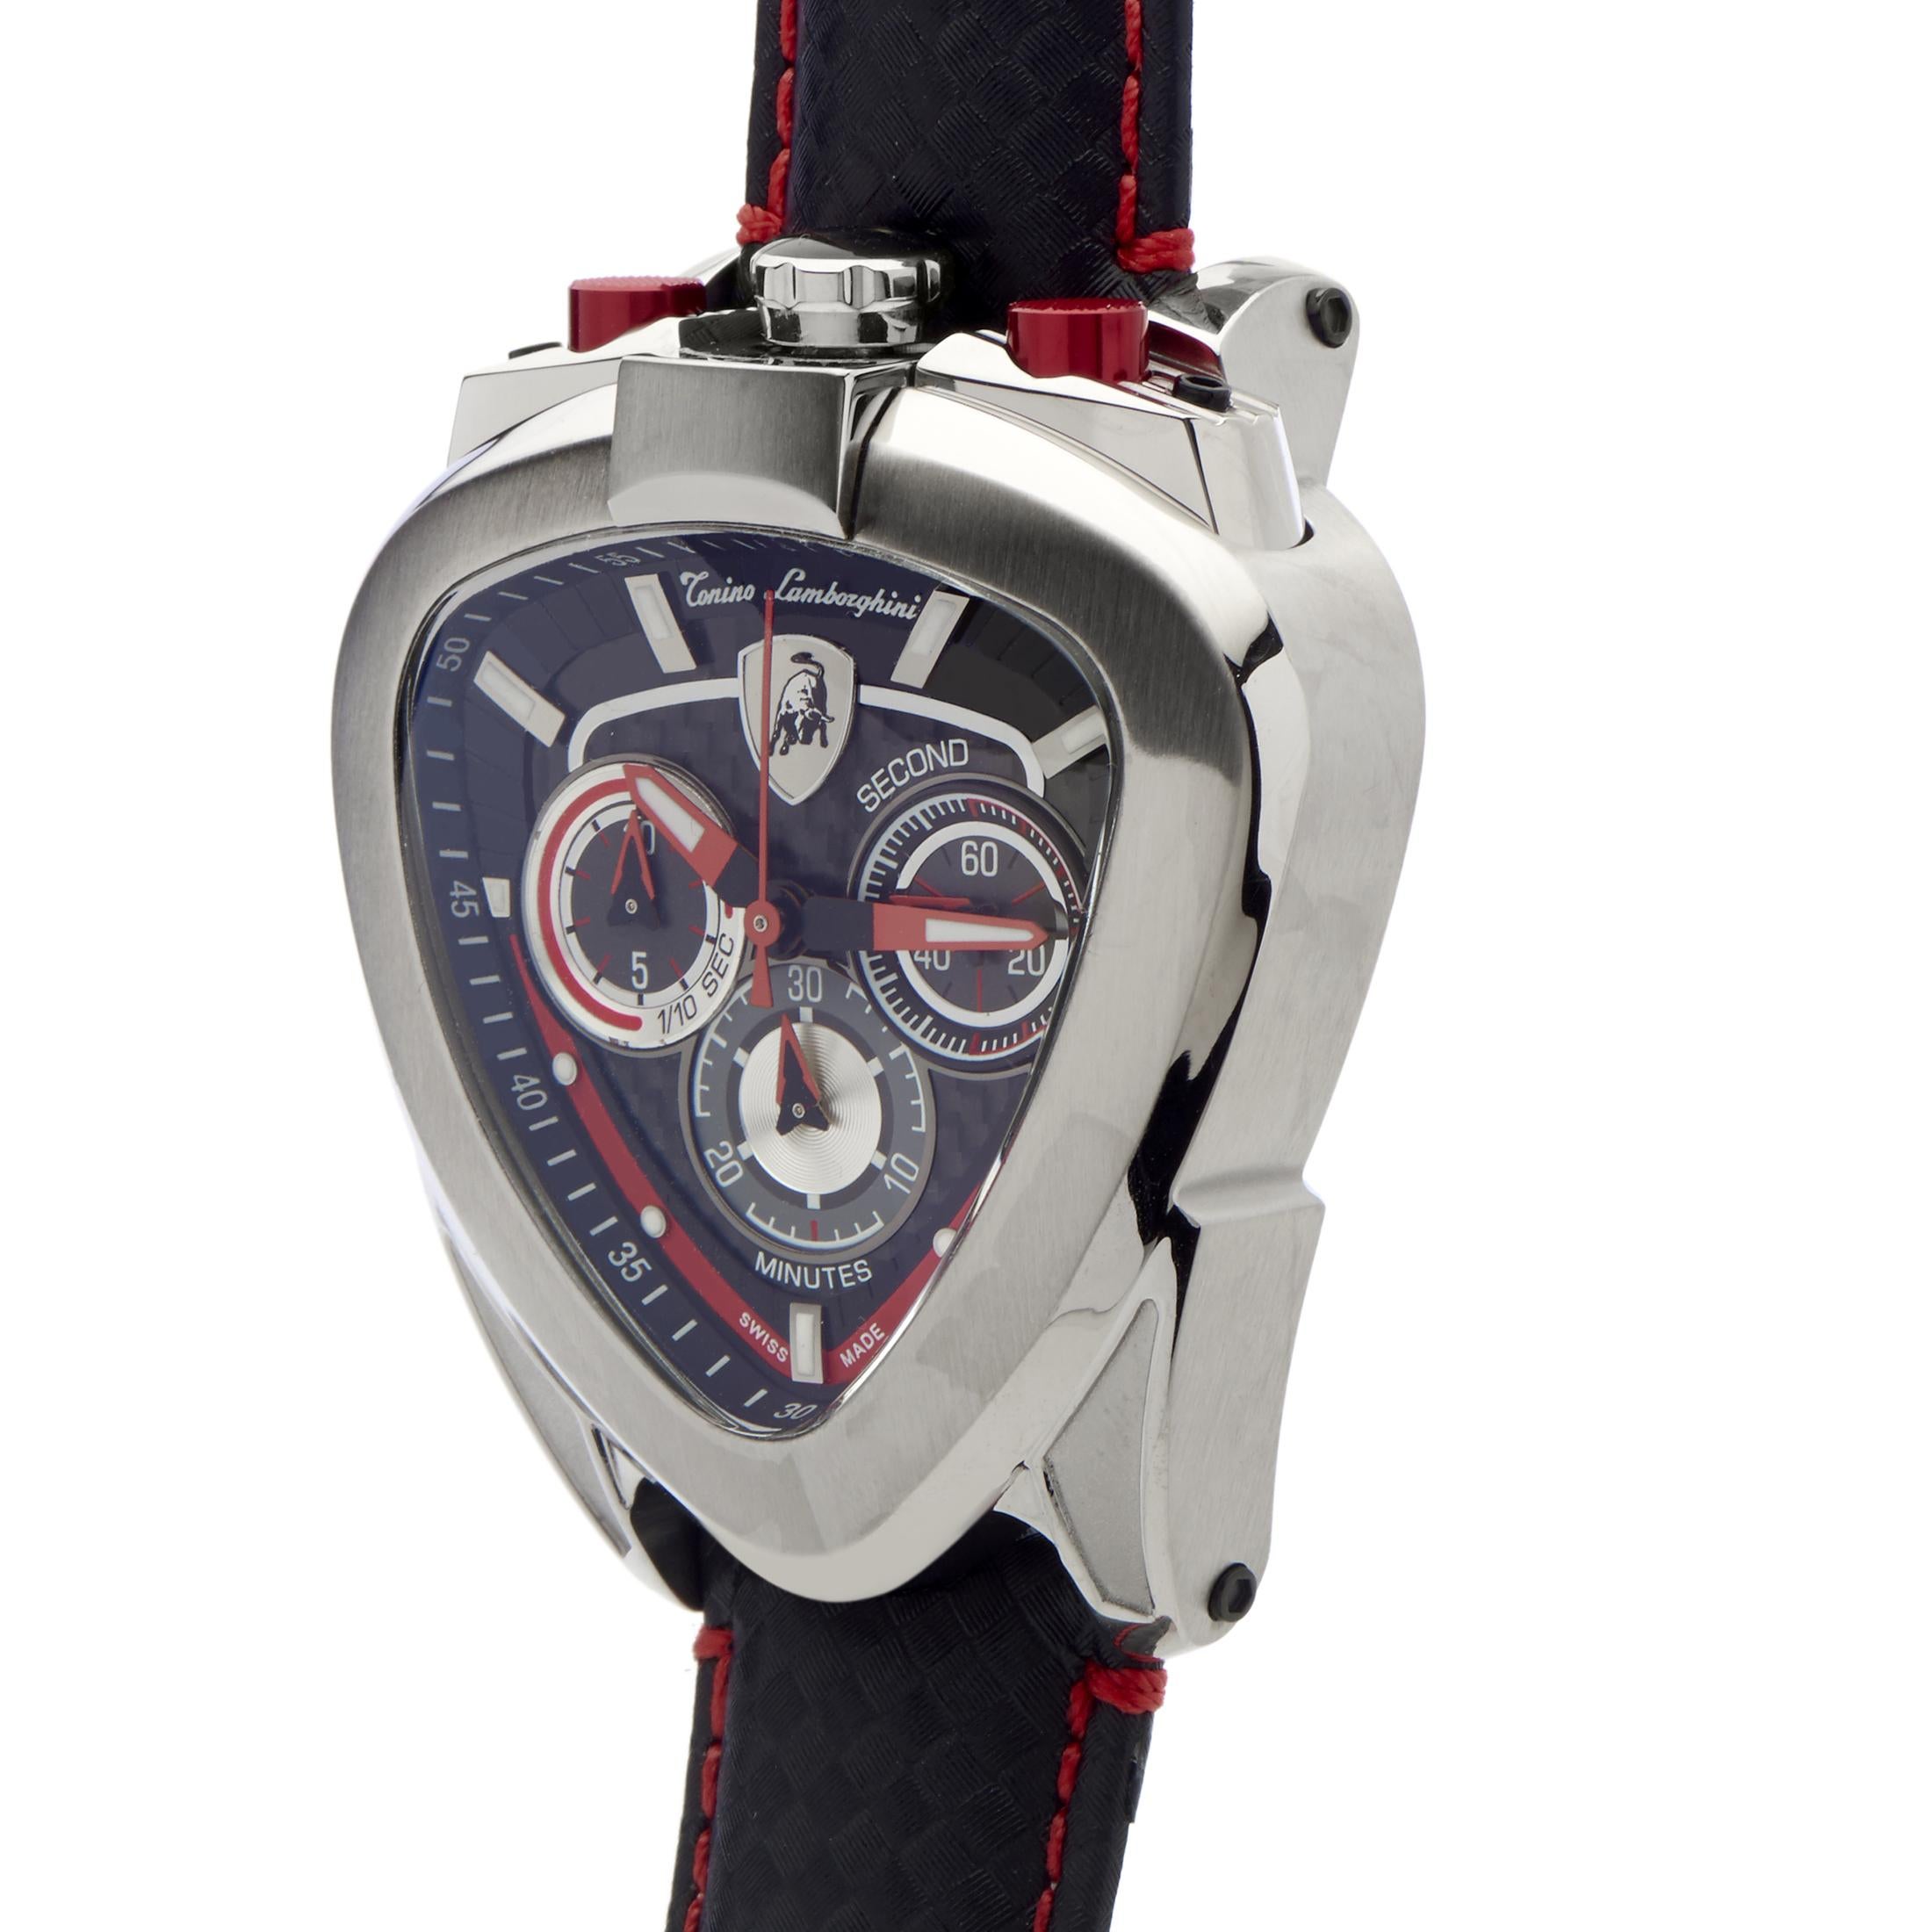 Employing fascinating imagery with strong ties to the brand's esteemed history such as the overall design reminiscent of their logo and the black-and-red contrast evoking the looks of a car's instrument board, this outstanding timepiece from Tonino